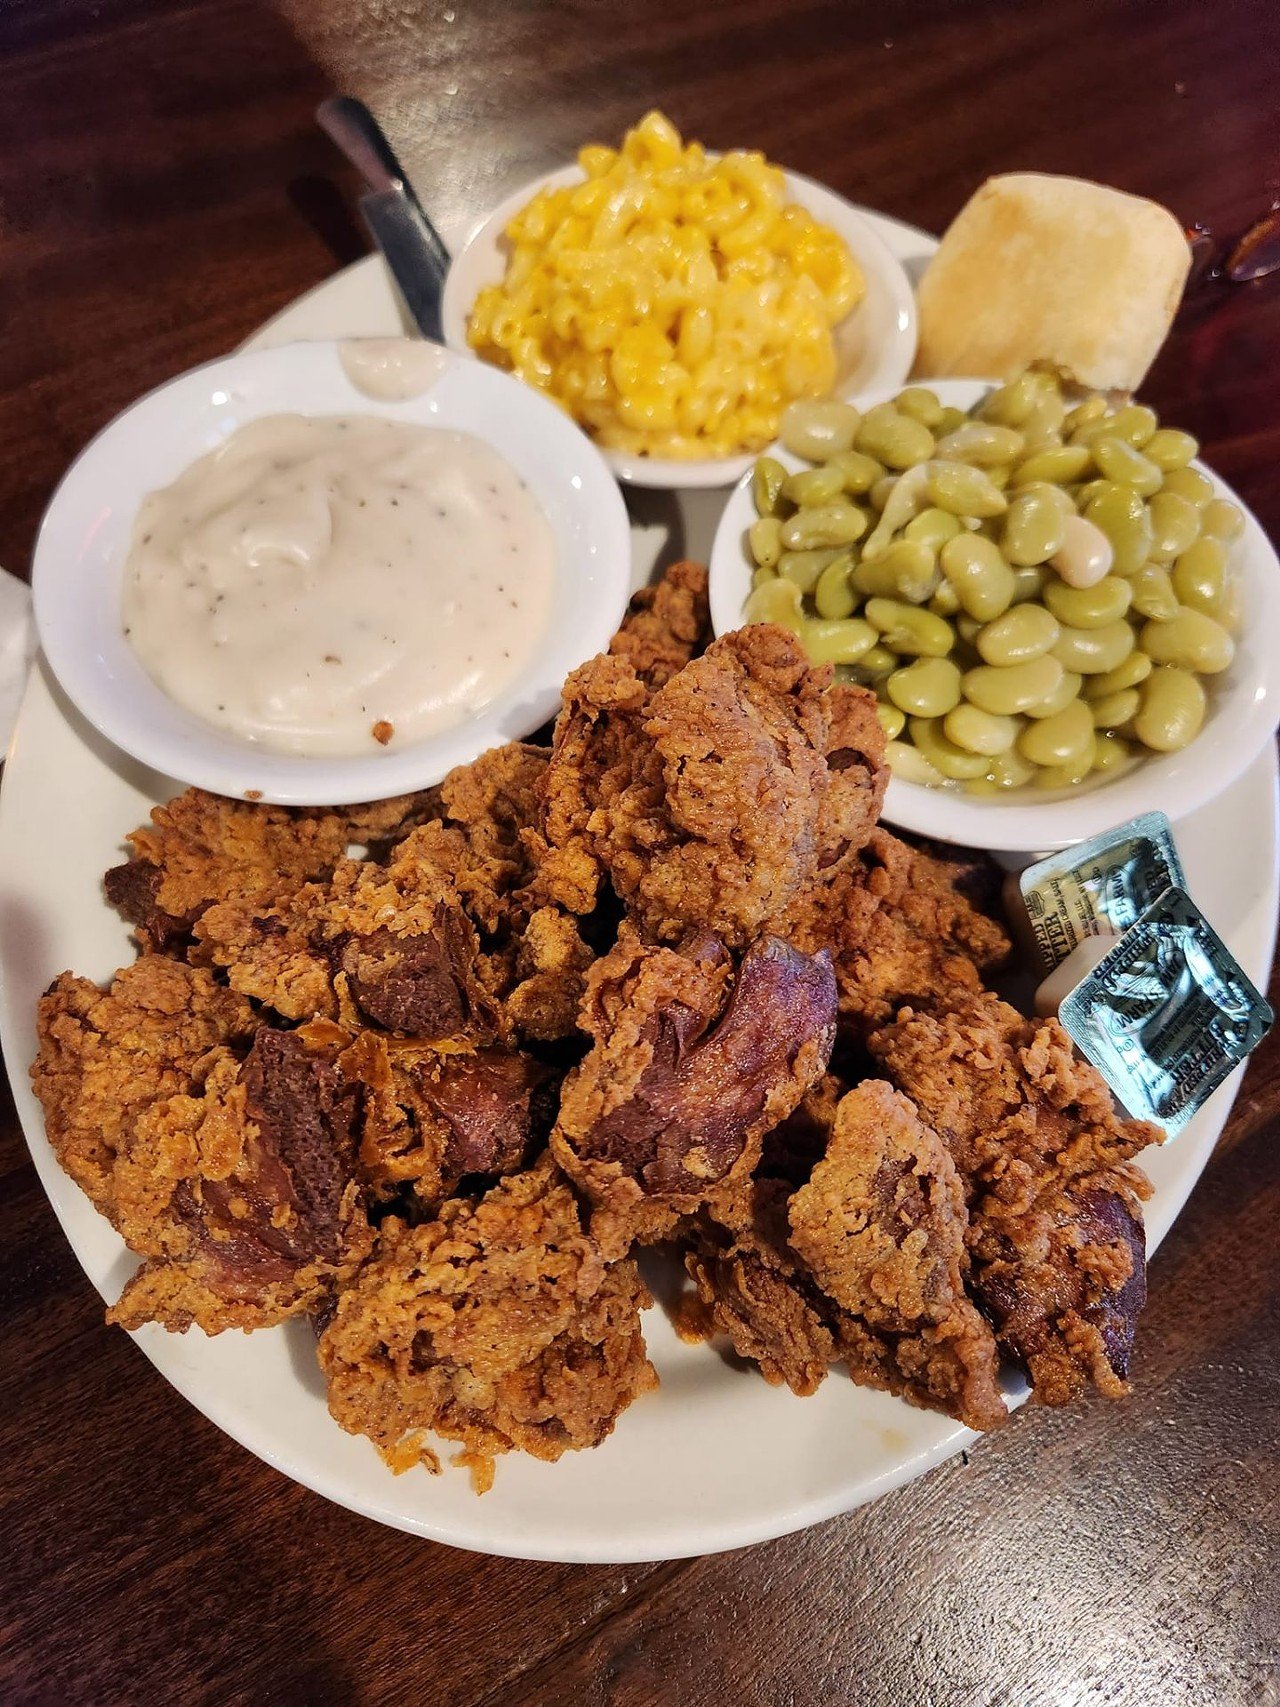 Check&#146;s
1101 East Burnett Ave 
Comfort food galore! Check&#146;s has fried catfish, pork chops, burgers and even has a bar. Photo via  Check&#146;s